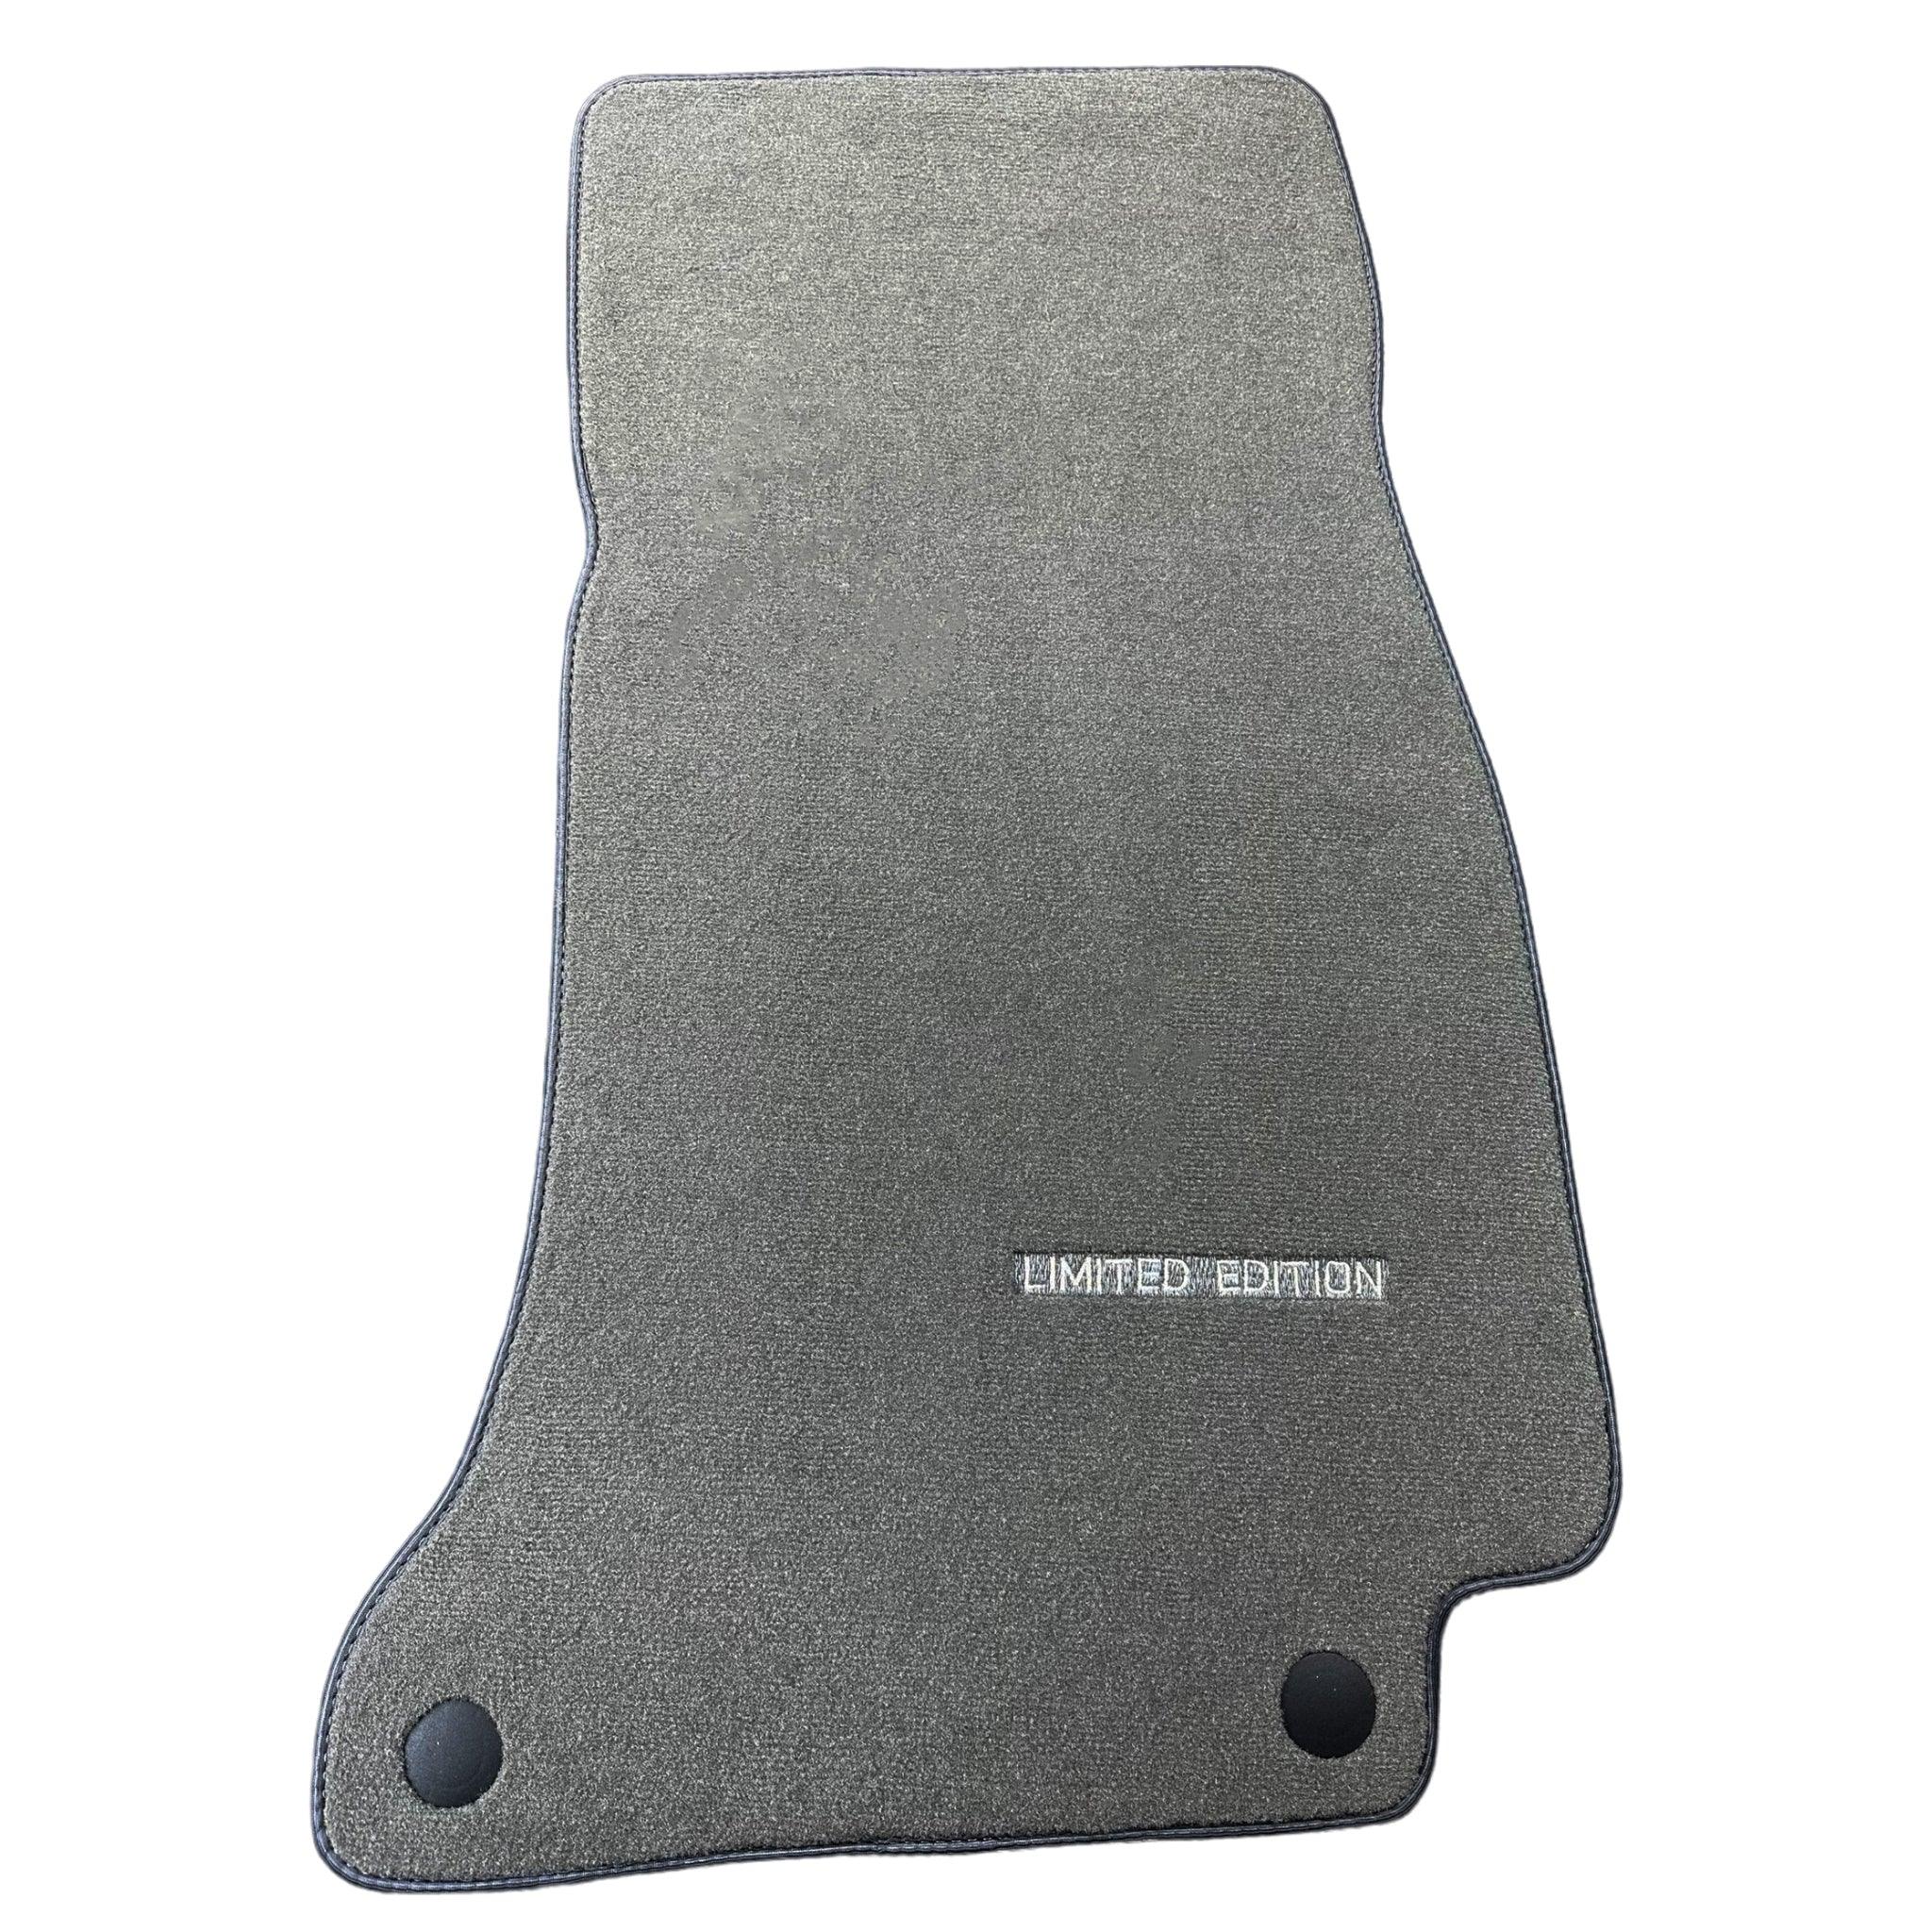 Gray Floor Mats For Mercedes Benz EQC-Class N293 (2019-2023) | Limited Edition